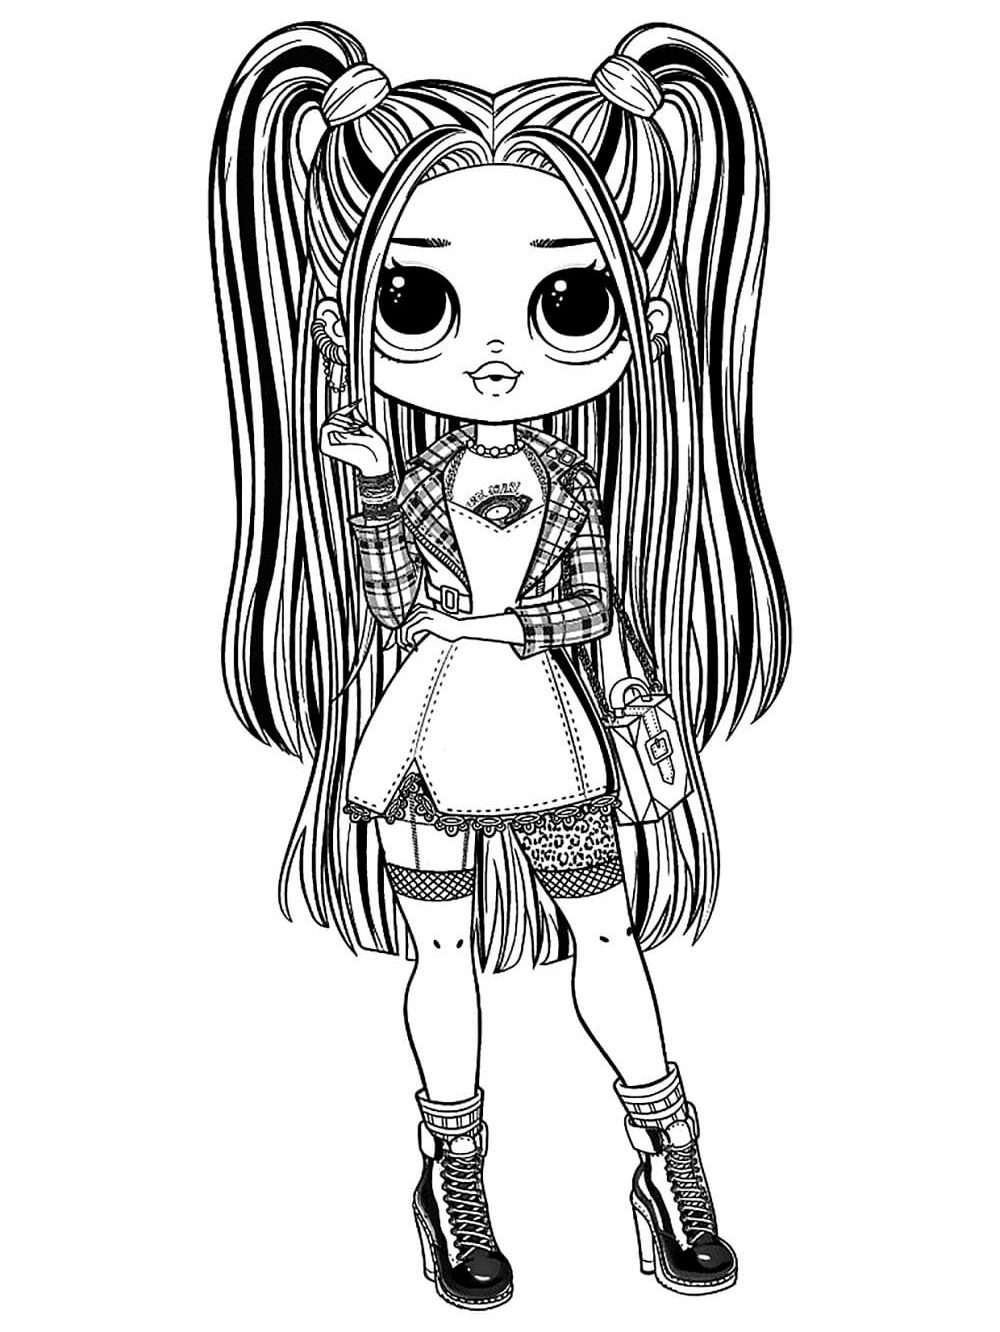 omg fashion lol omg doll coloring pages